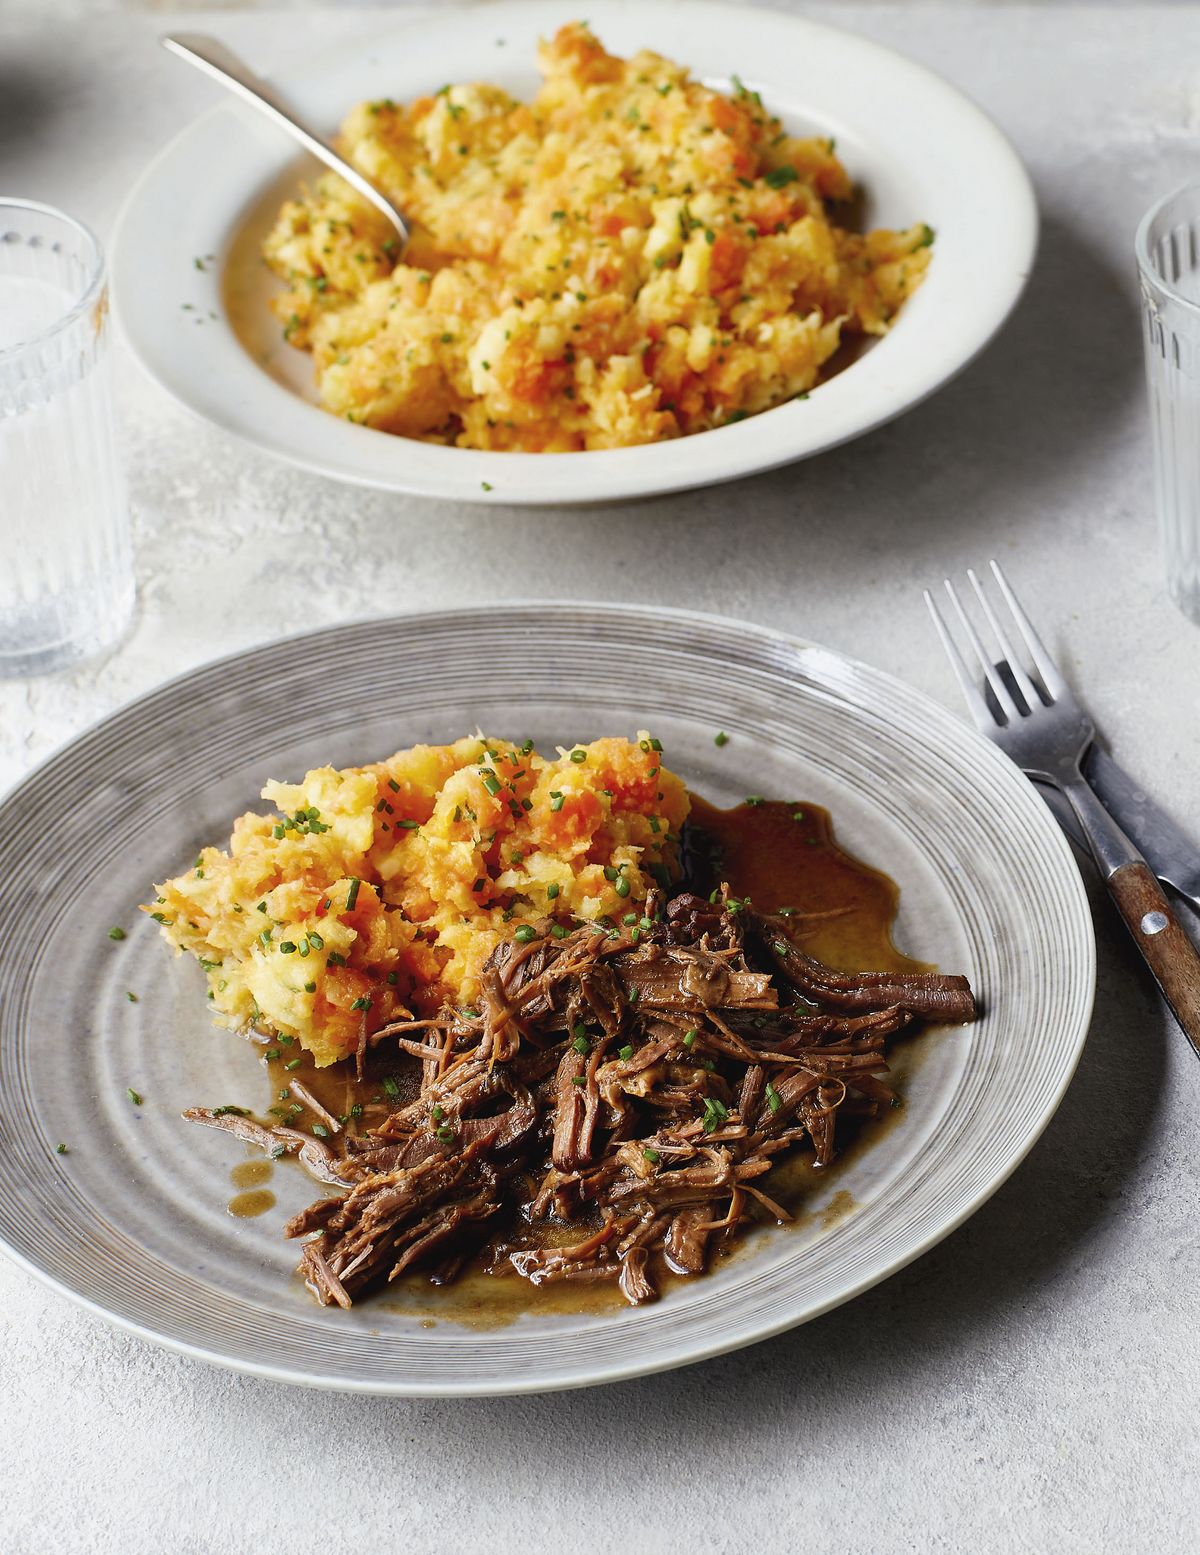 Eat Well For Less Slow-Cooked Beef with Root Veg Mash